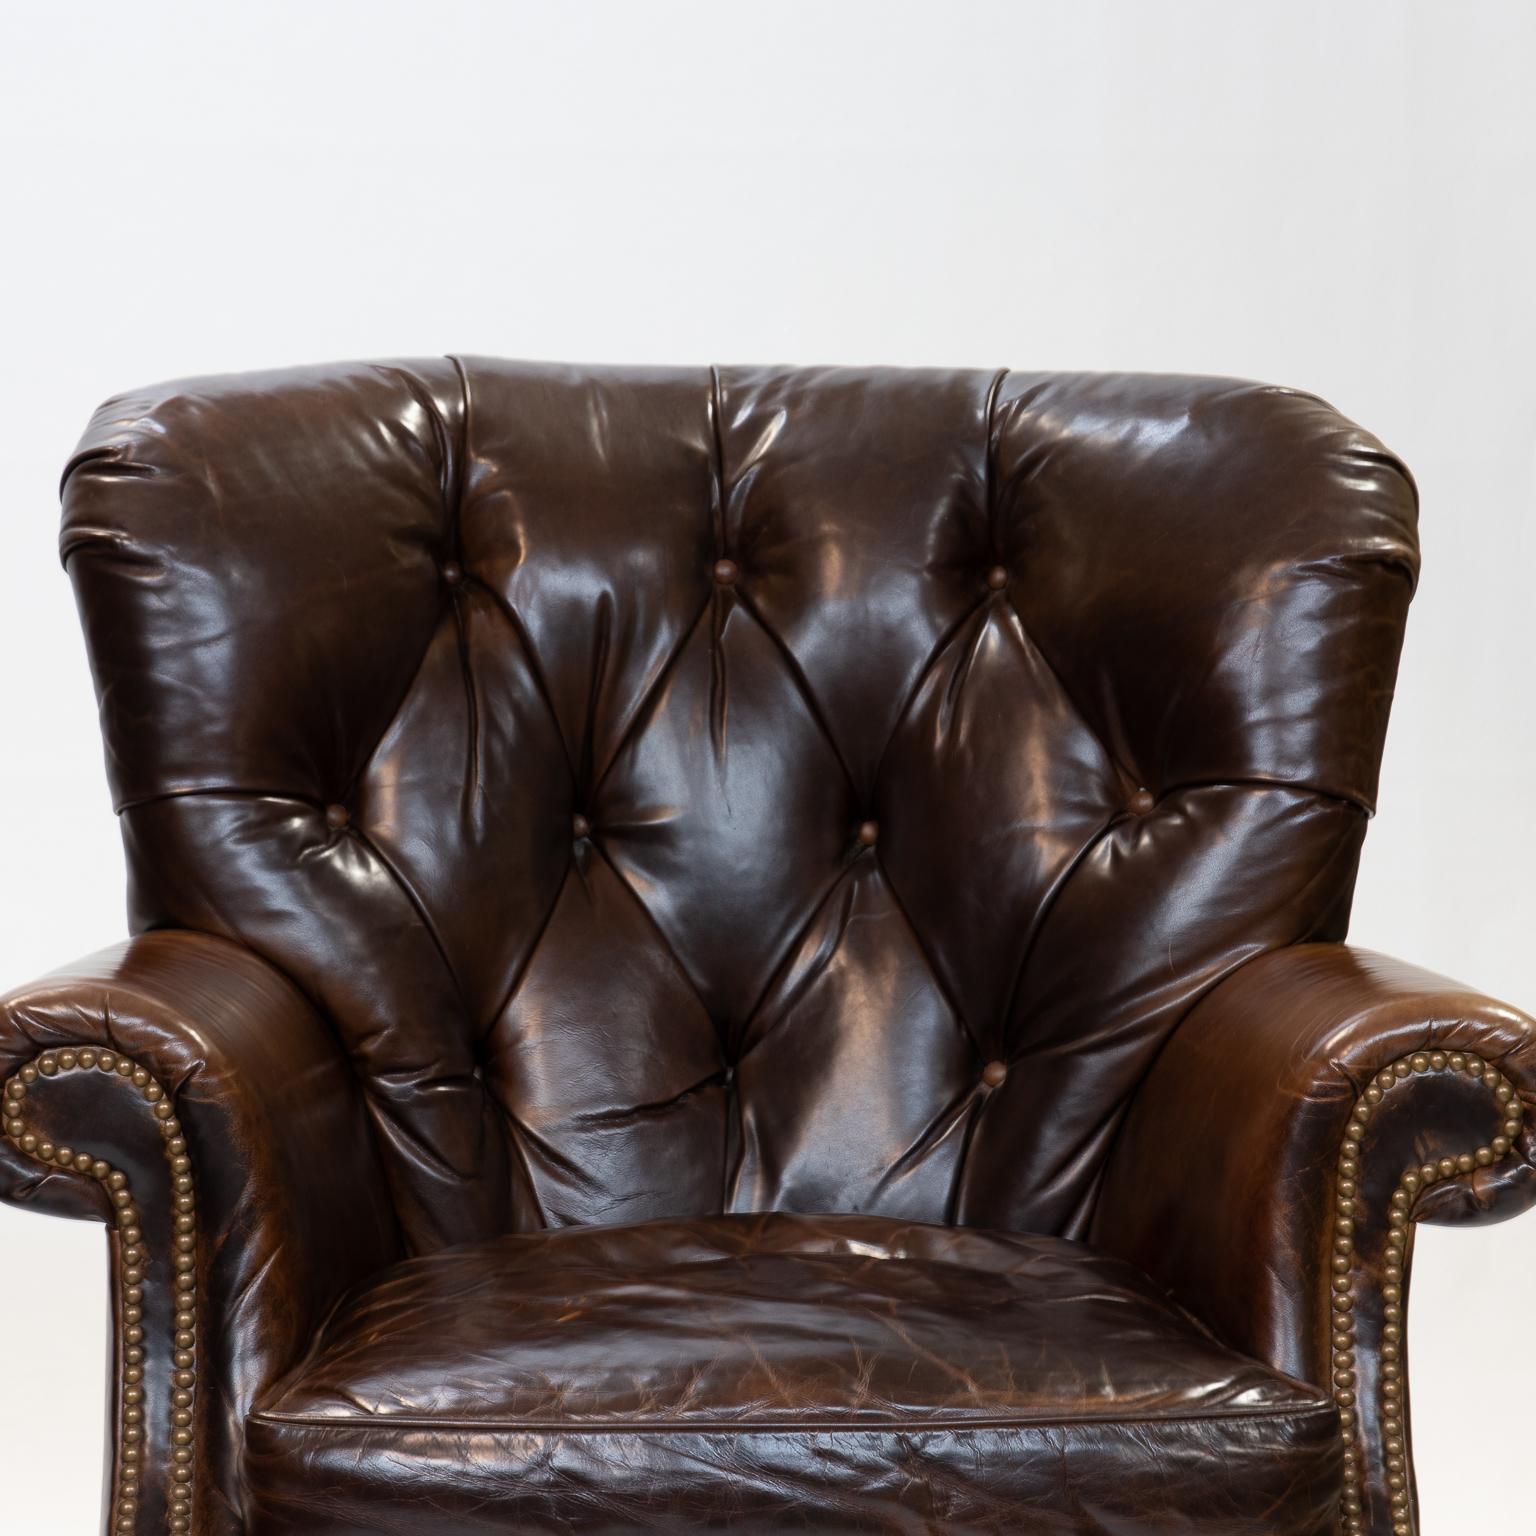 Other Pair of Tufted Back Leather Club Chairs